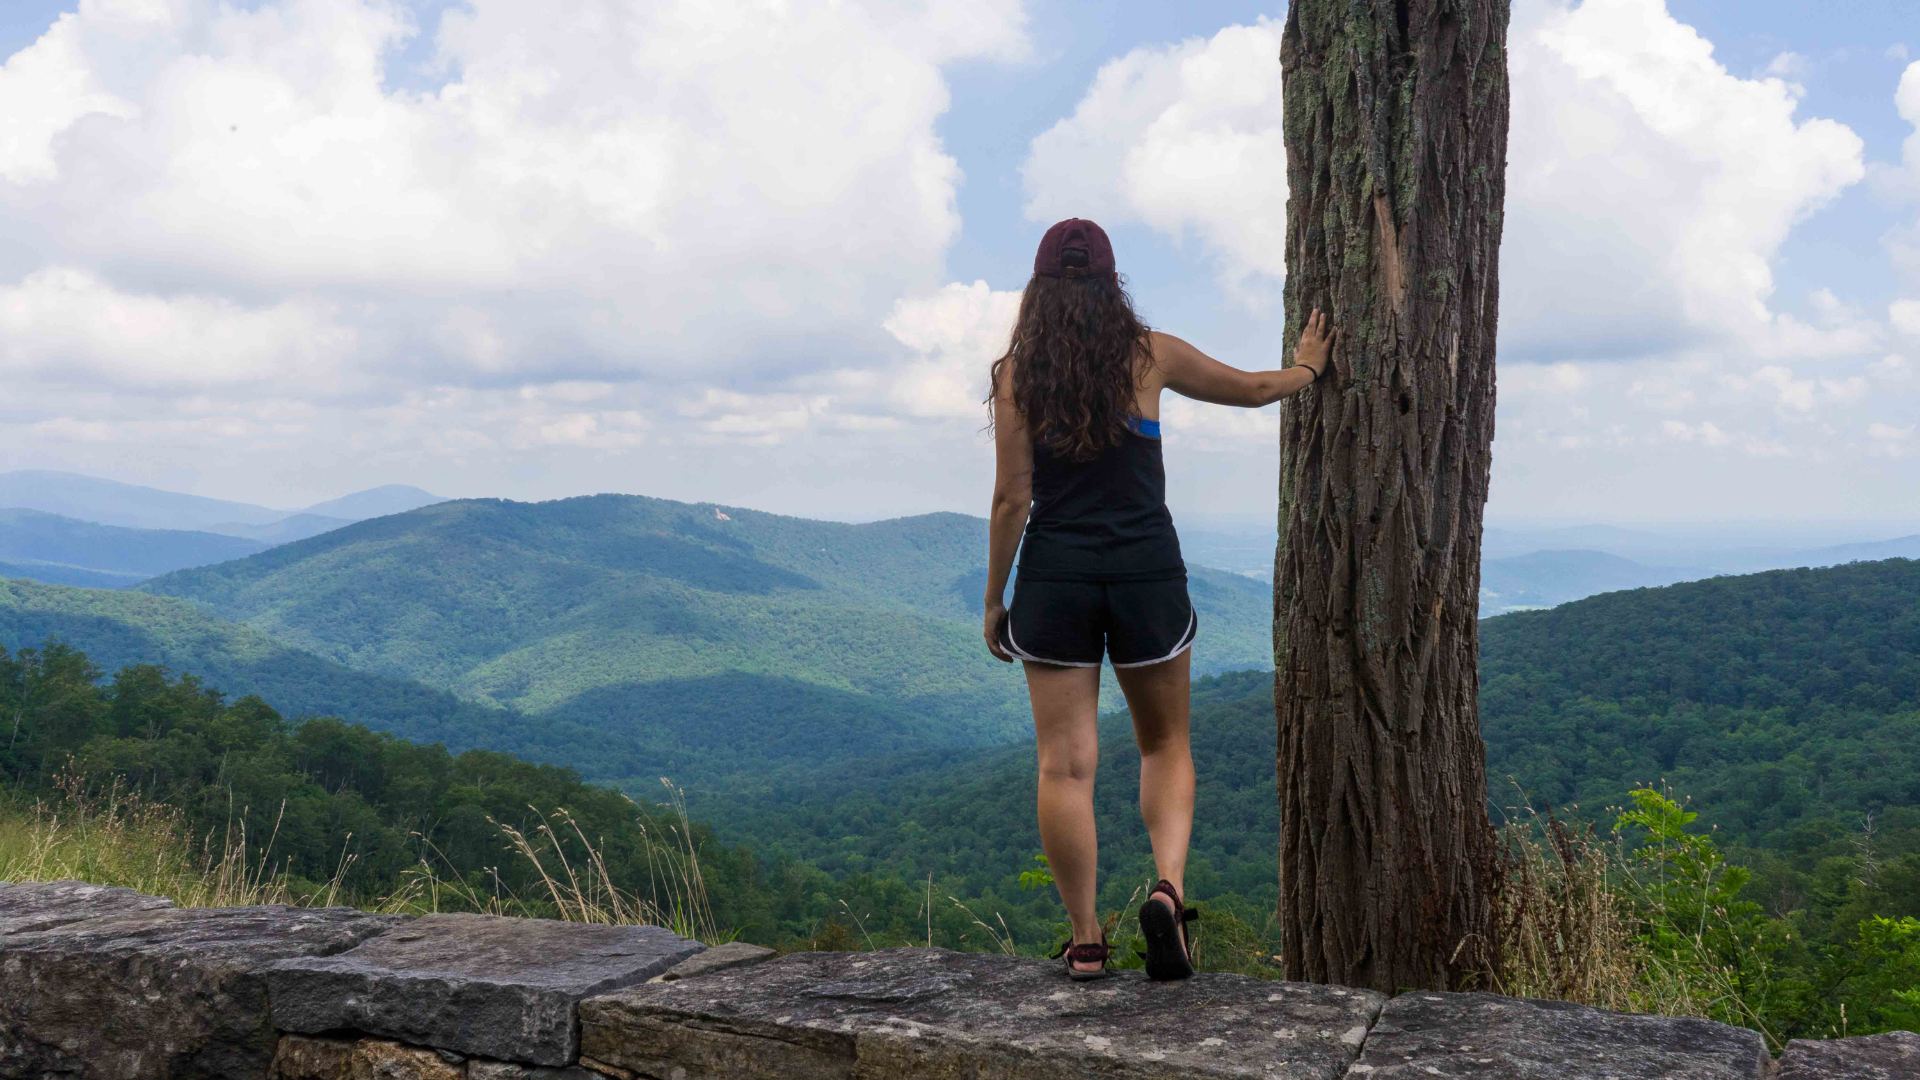 The Blue Ridge Parkway Road Trip: Shenandoah & Great Smoky Mountains National Parks